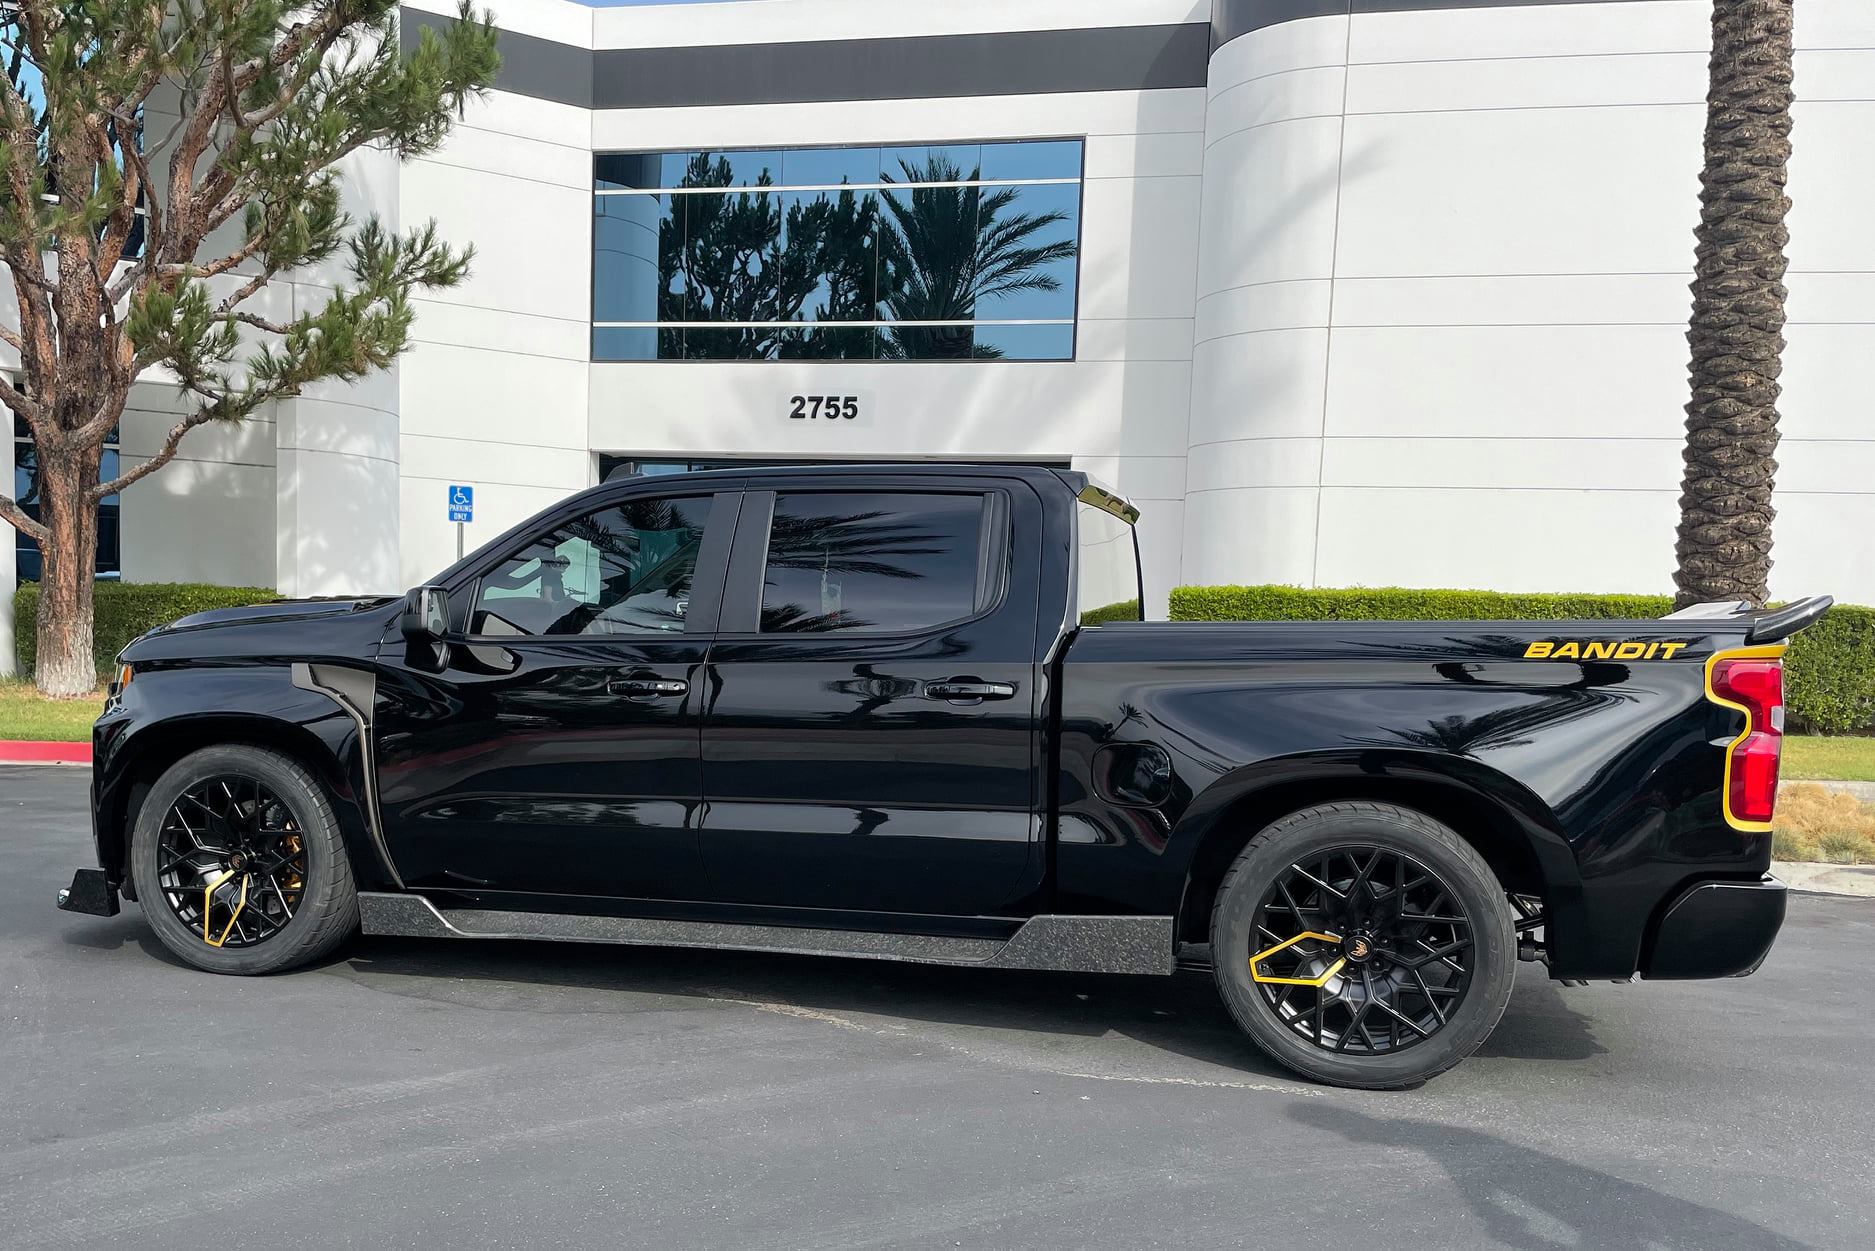 Chevy Bandit Truck Isn't Just for Showing Off